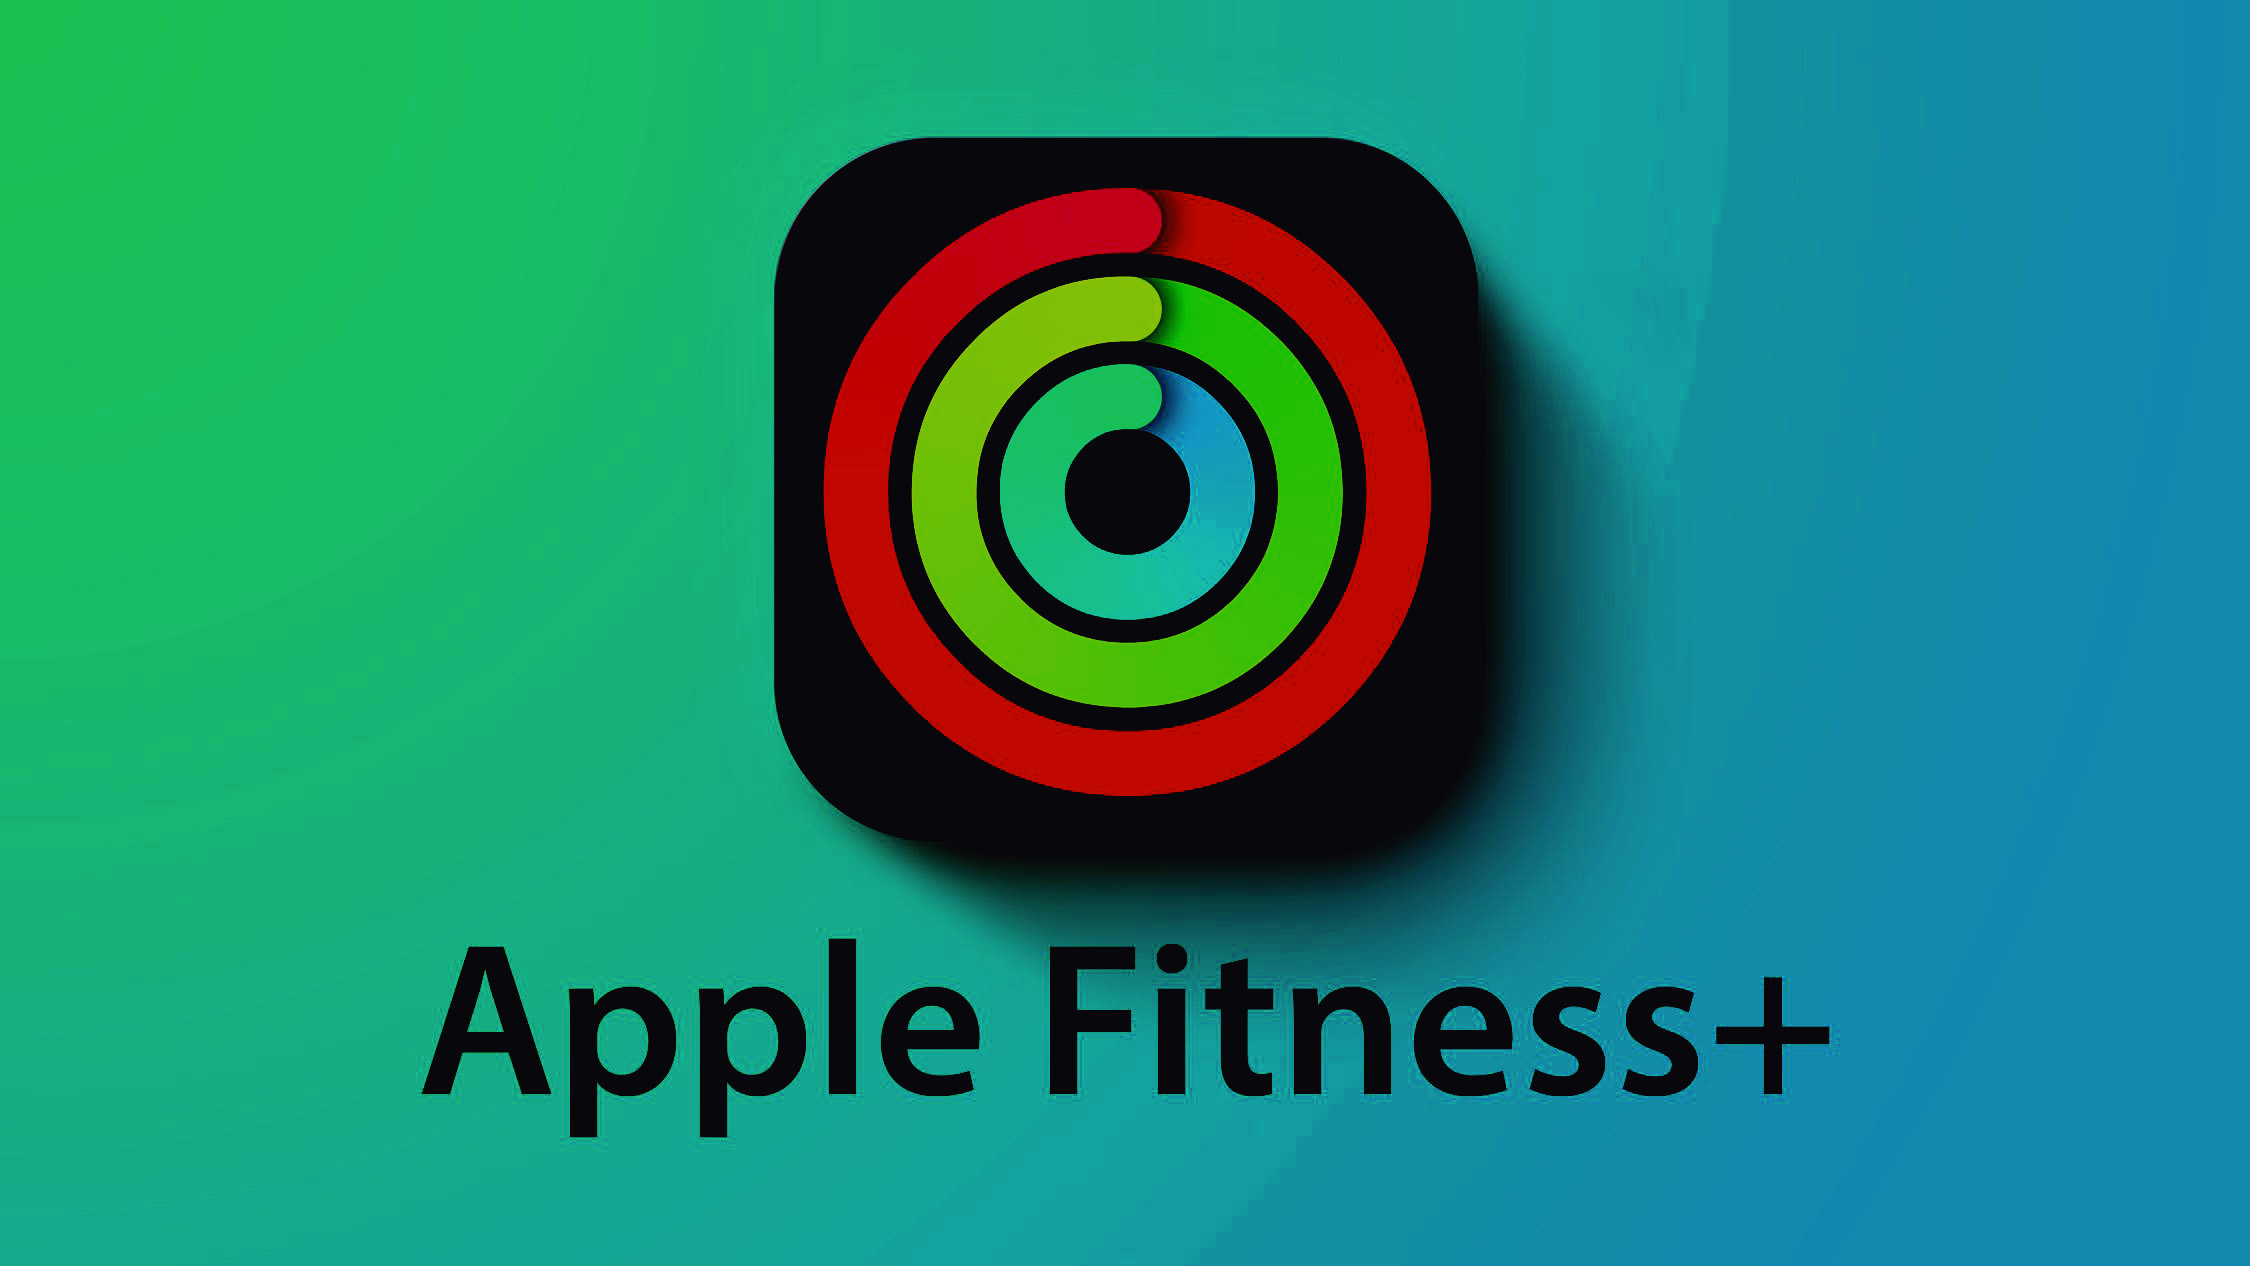 Fitness+ is now available on the new macOS Monterey